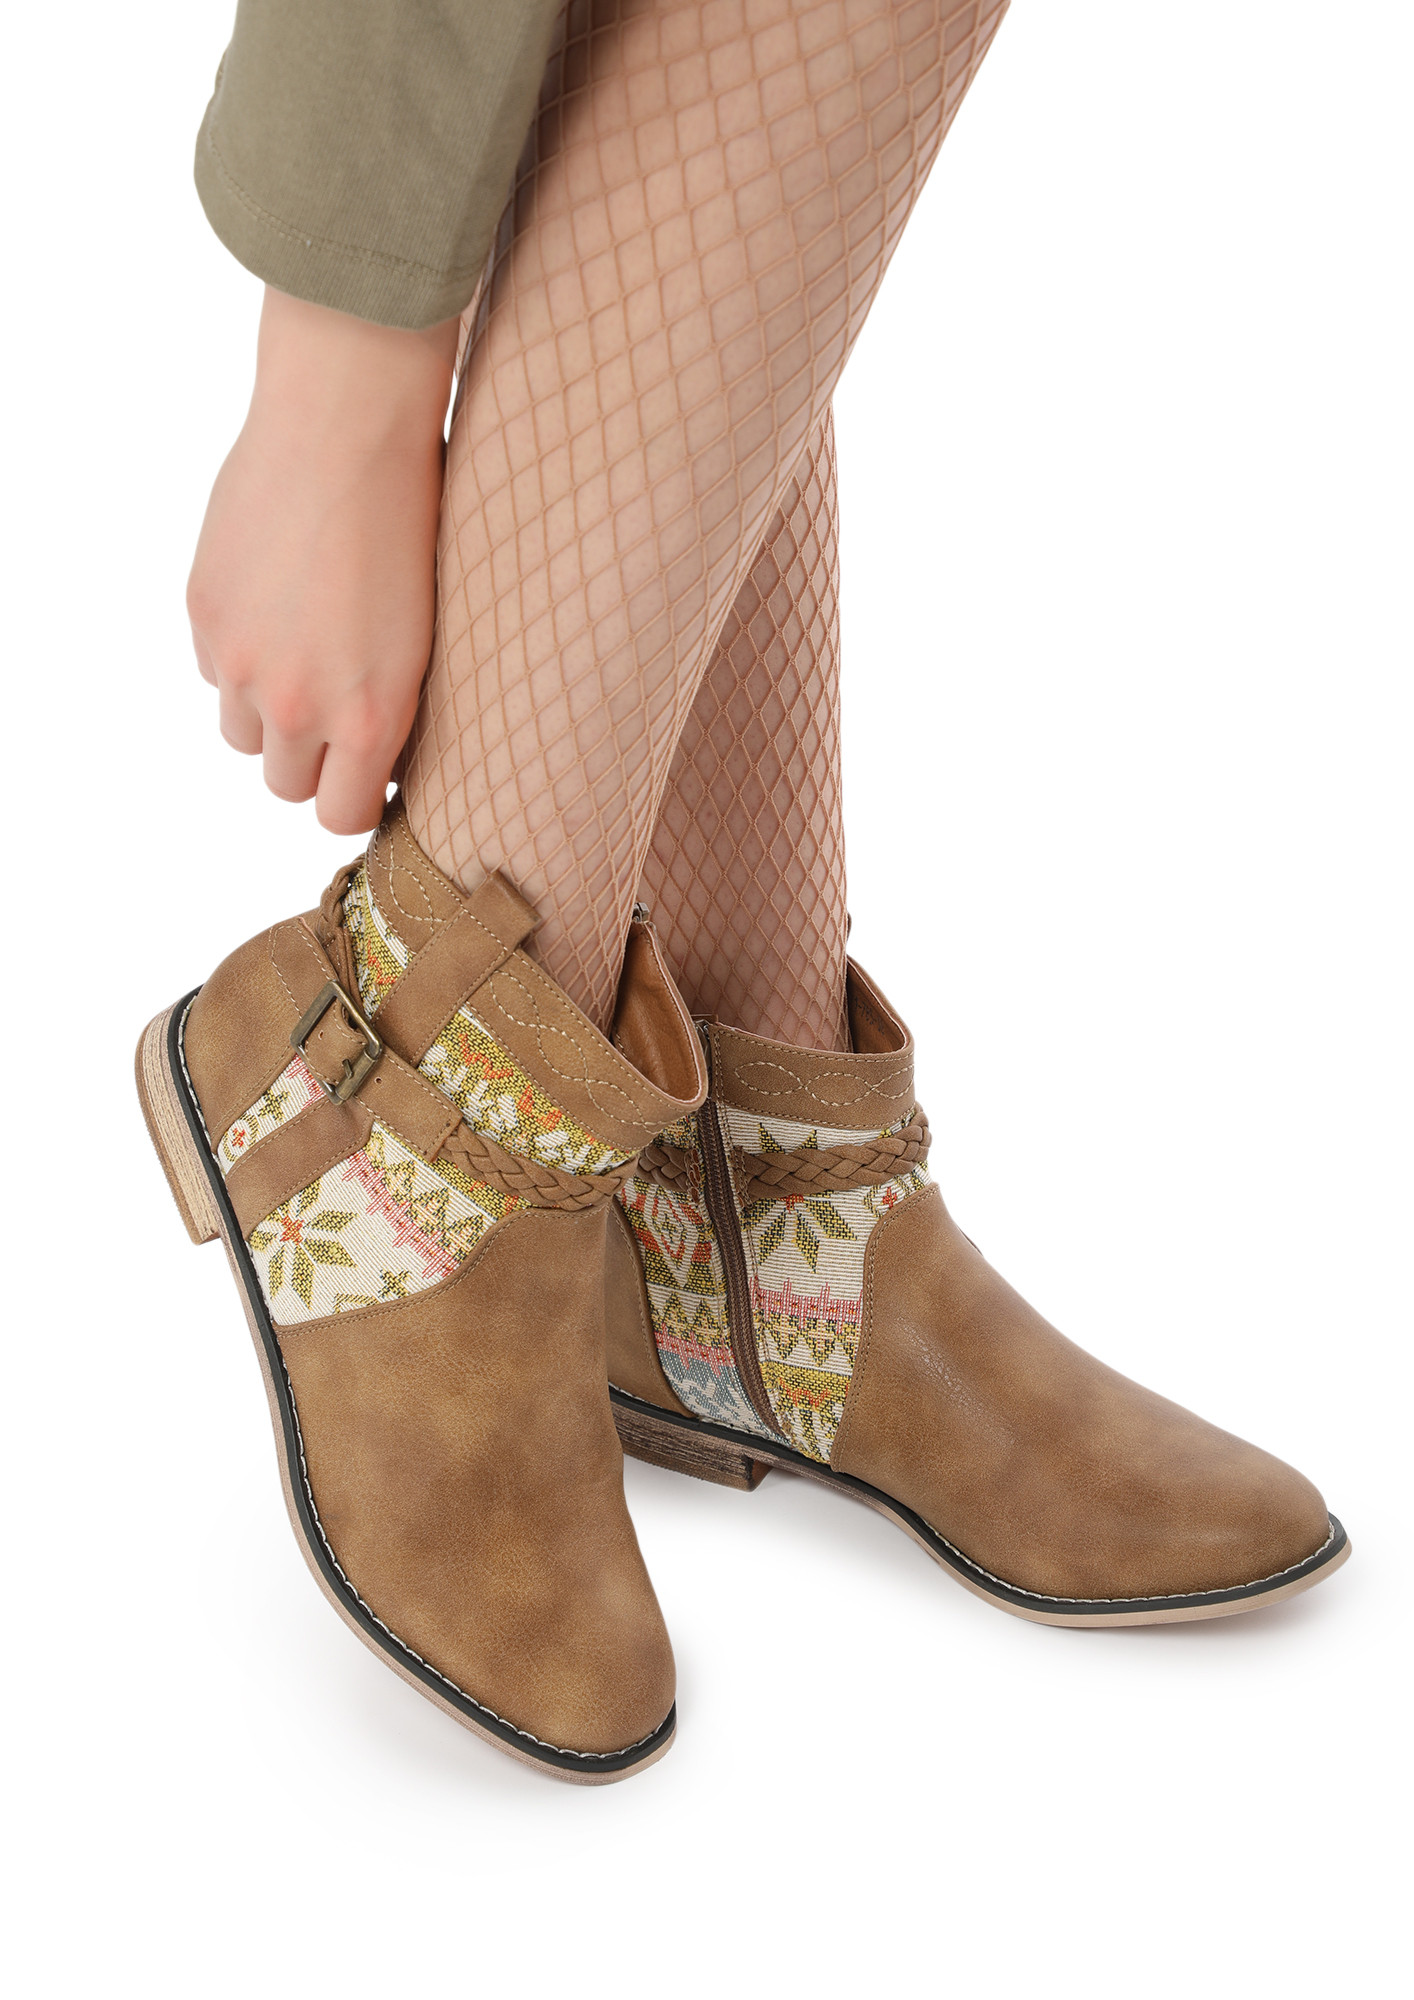 BOHEMIAN SPIRIT CAMEL BROWN ANKLE BOOTS